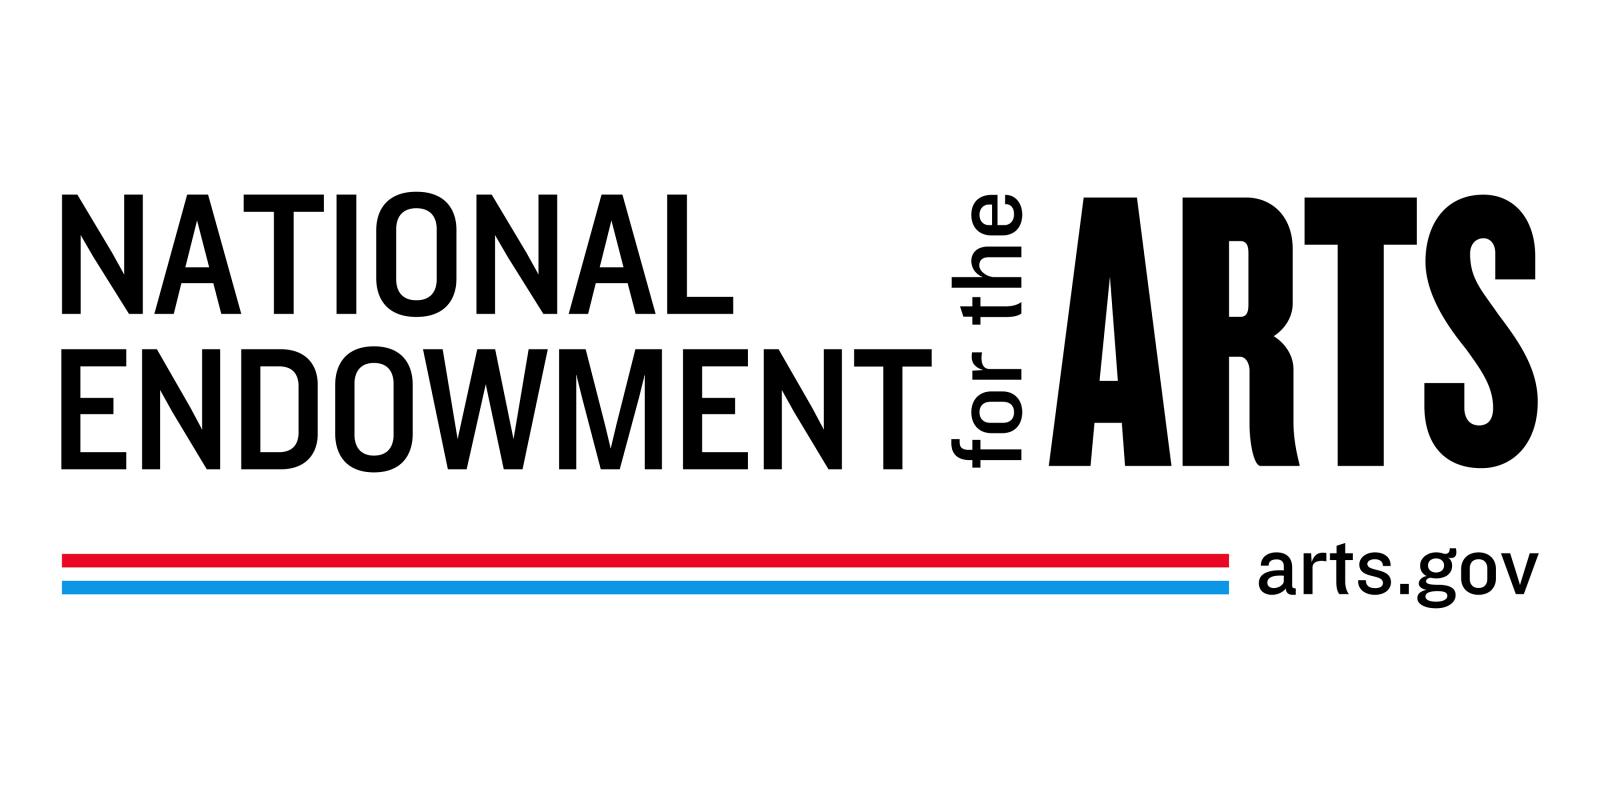 National Endowment for the Arts image